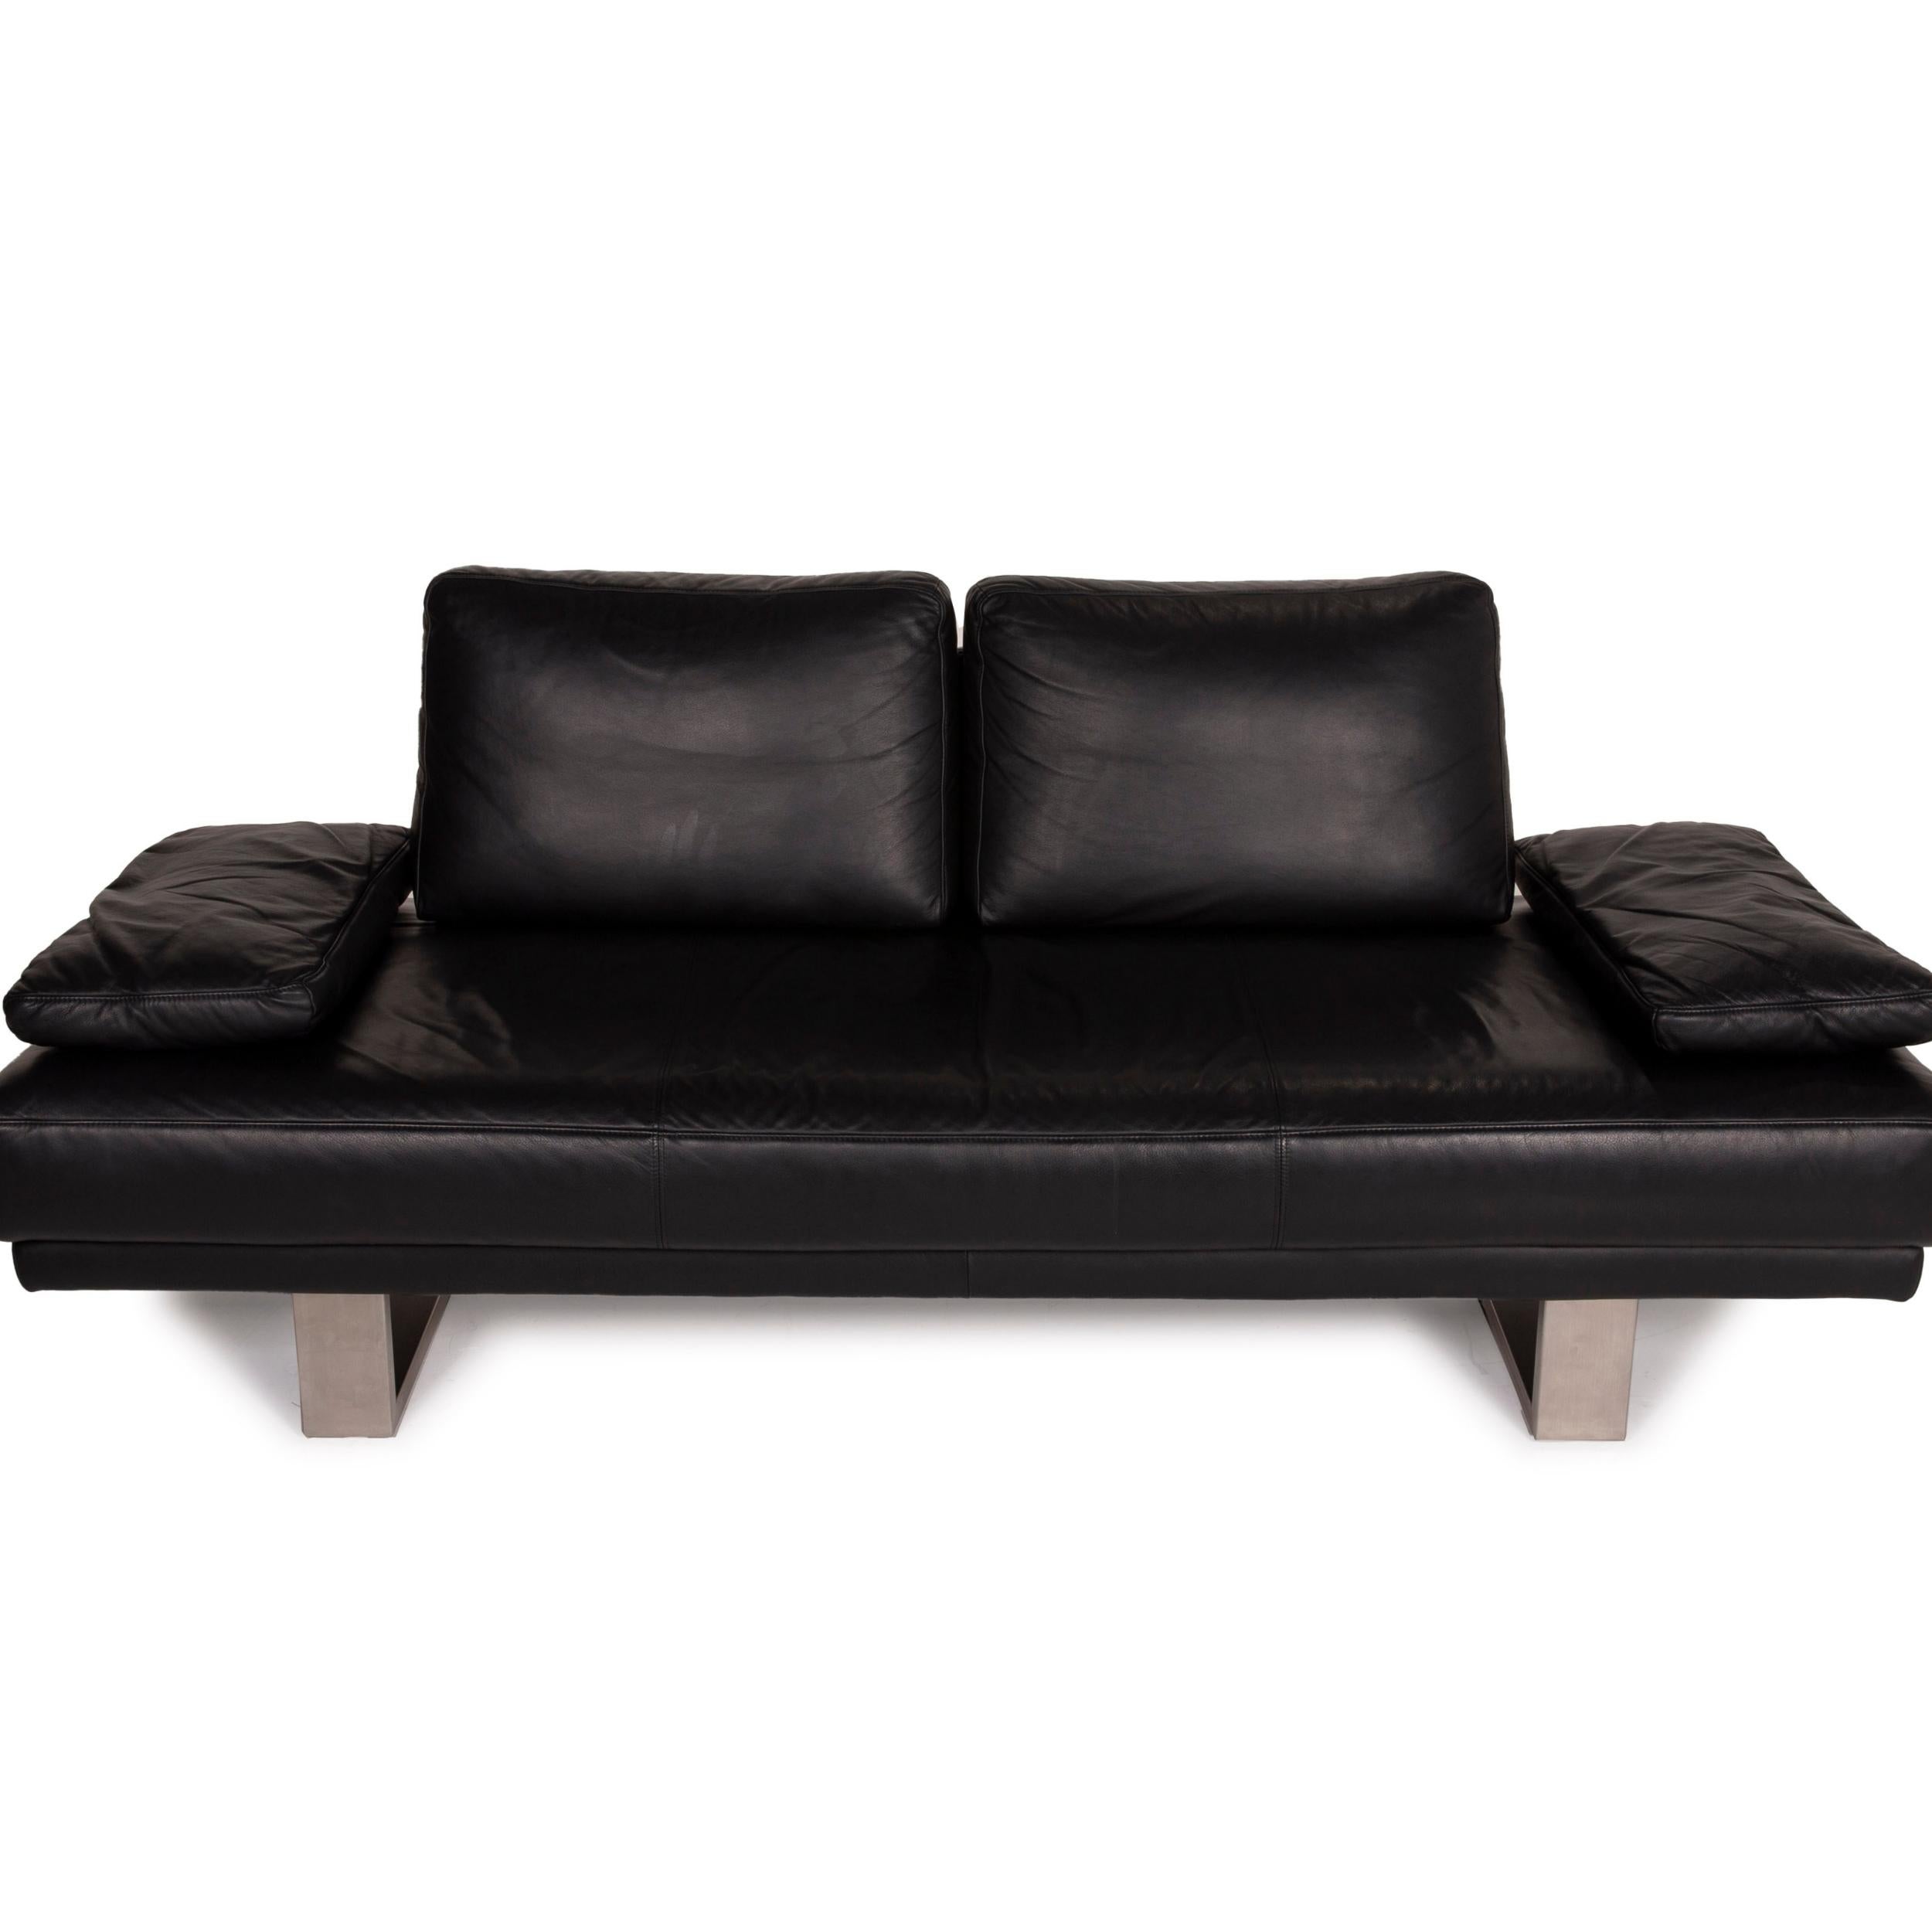 Rolf Benz 6600 Leather Sofa Black Two-Seater 2